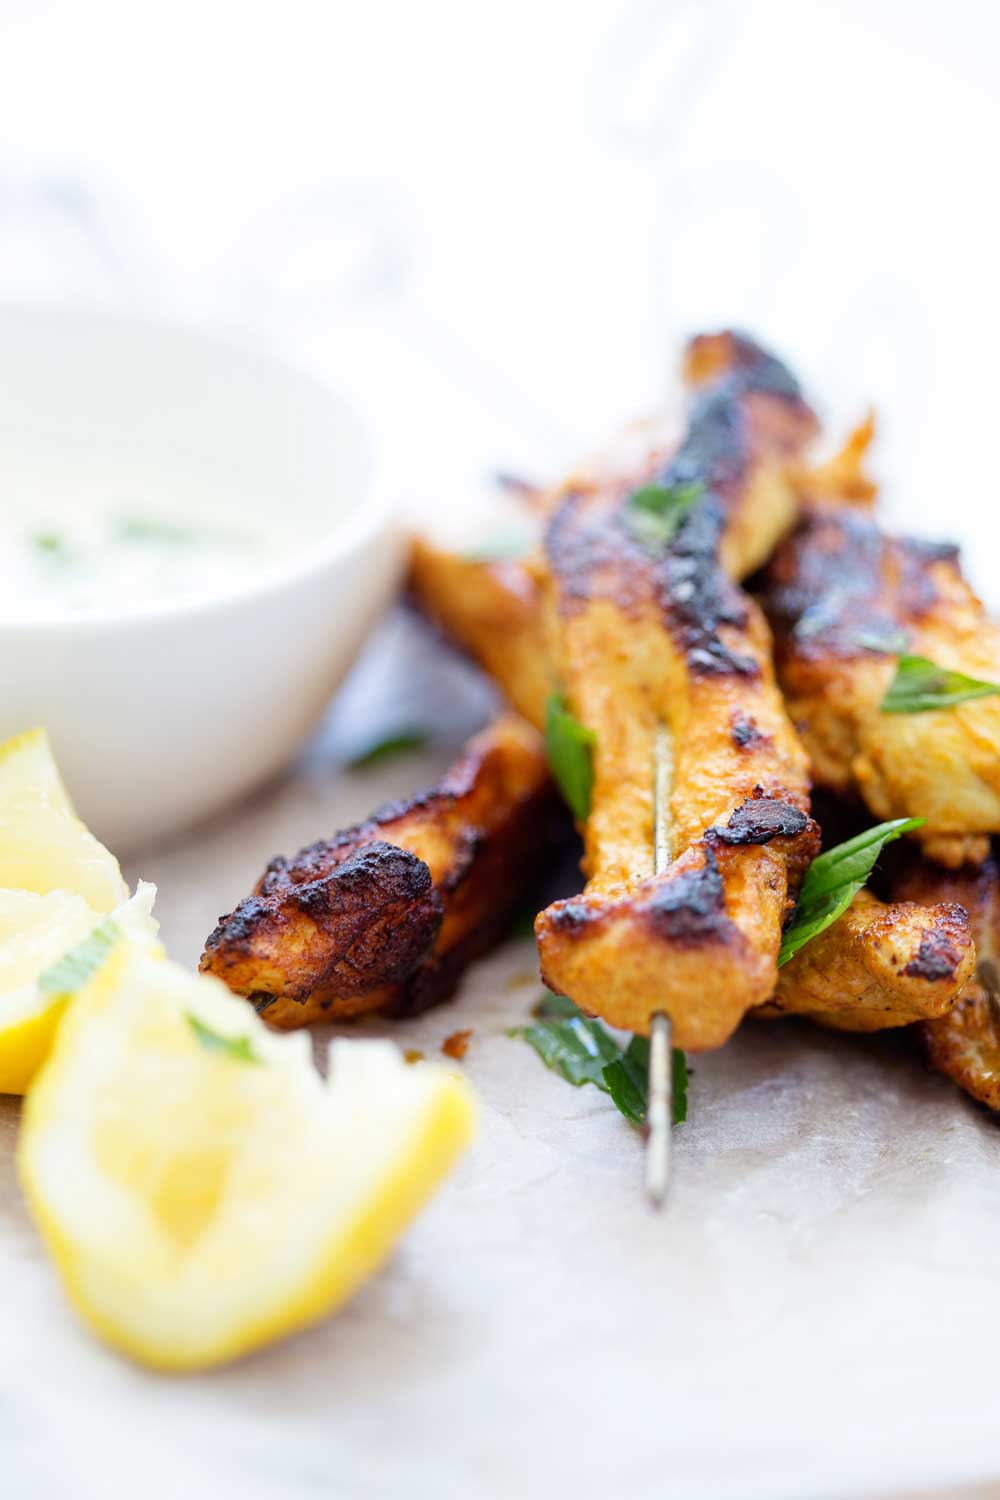 Fragrant, spicy (but not hot) sour and slightly sweet. These chicken skewers have it all!! The juicy chicken is marinated in a wonderful mix of flavours before being charred to perfection and basted with a lemon and sugar mixture. They are juicy, flavourful and utterly delicious!!! | Sprinkles and Sprouts